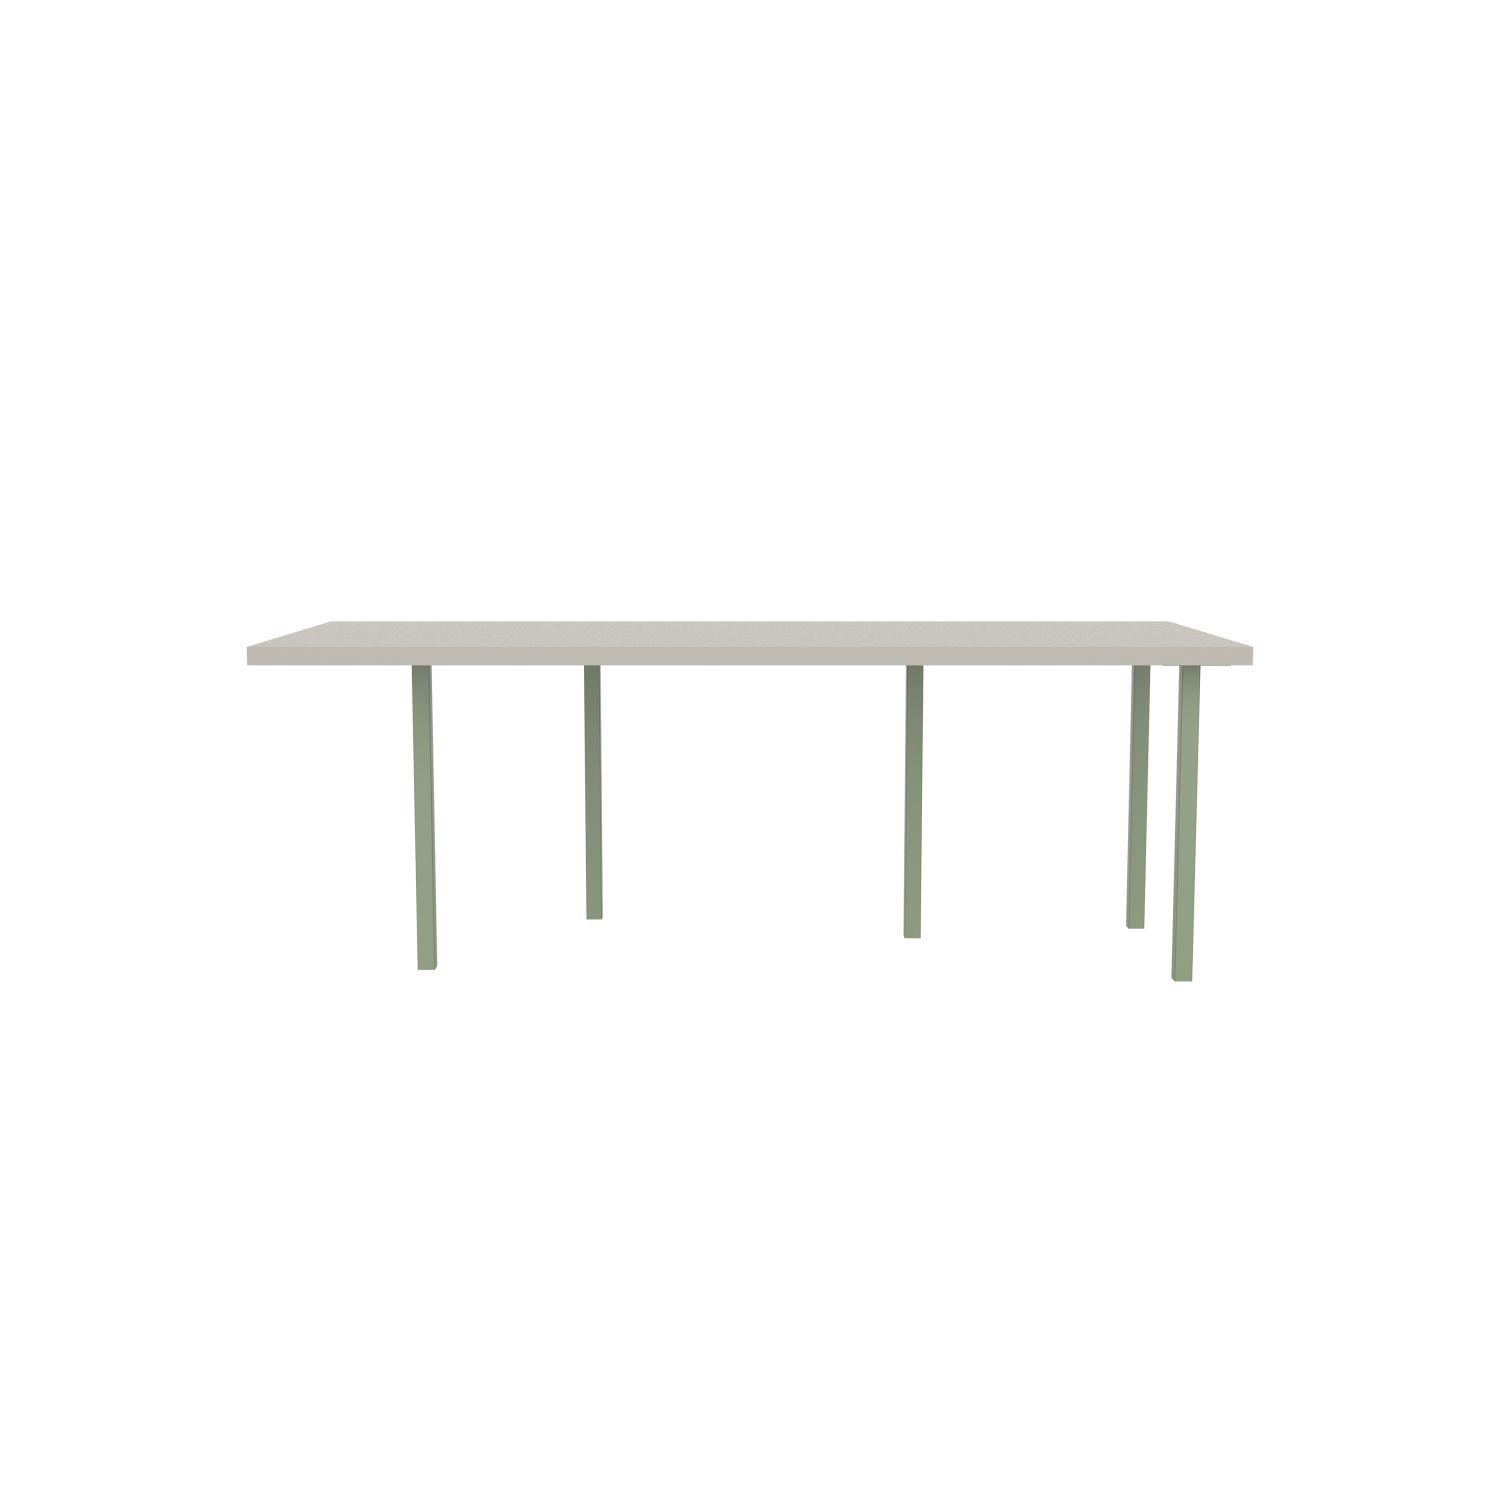 lensvelt bbrand table five fixed heigt 915x218 hpl white 50 mm price level 1 green ral6021